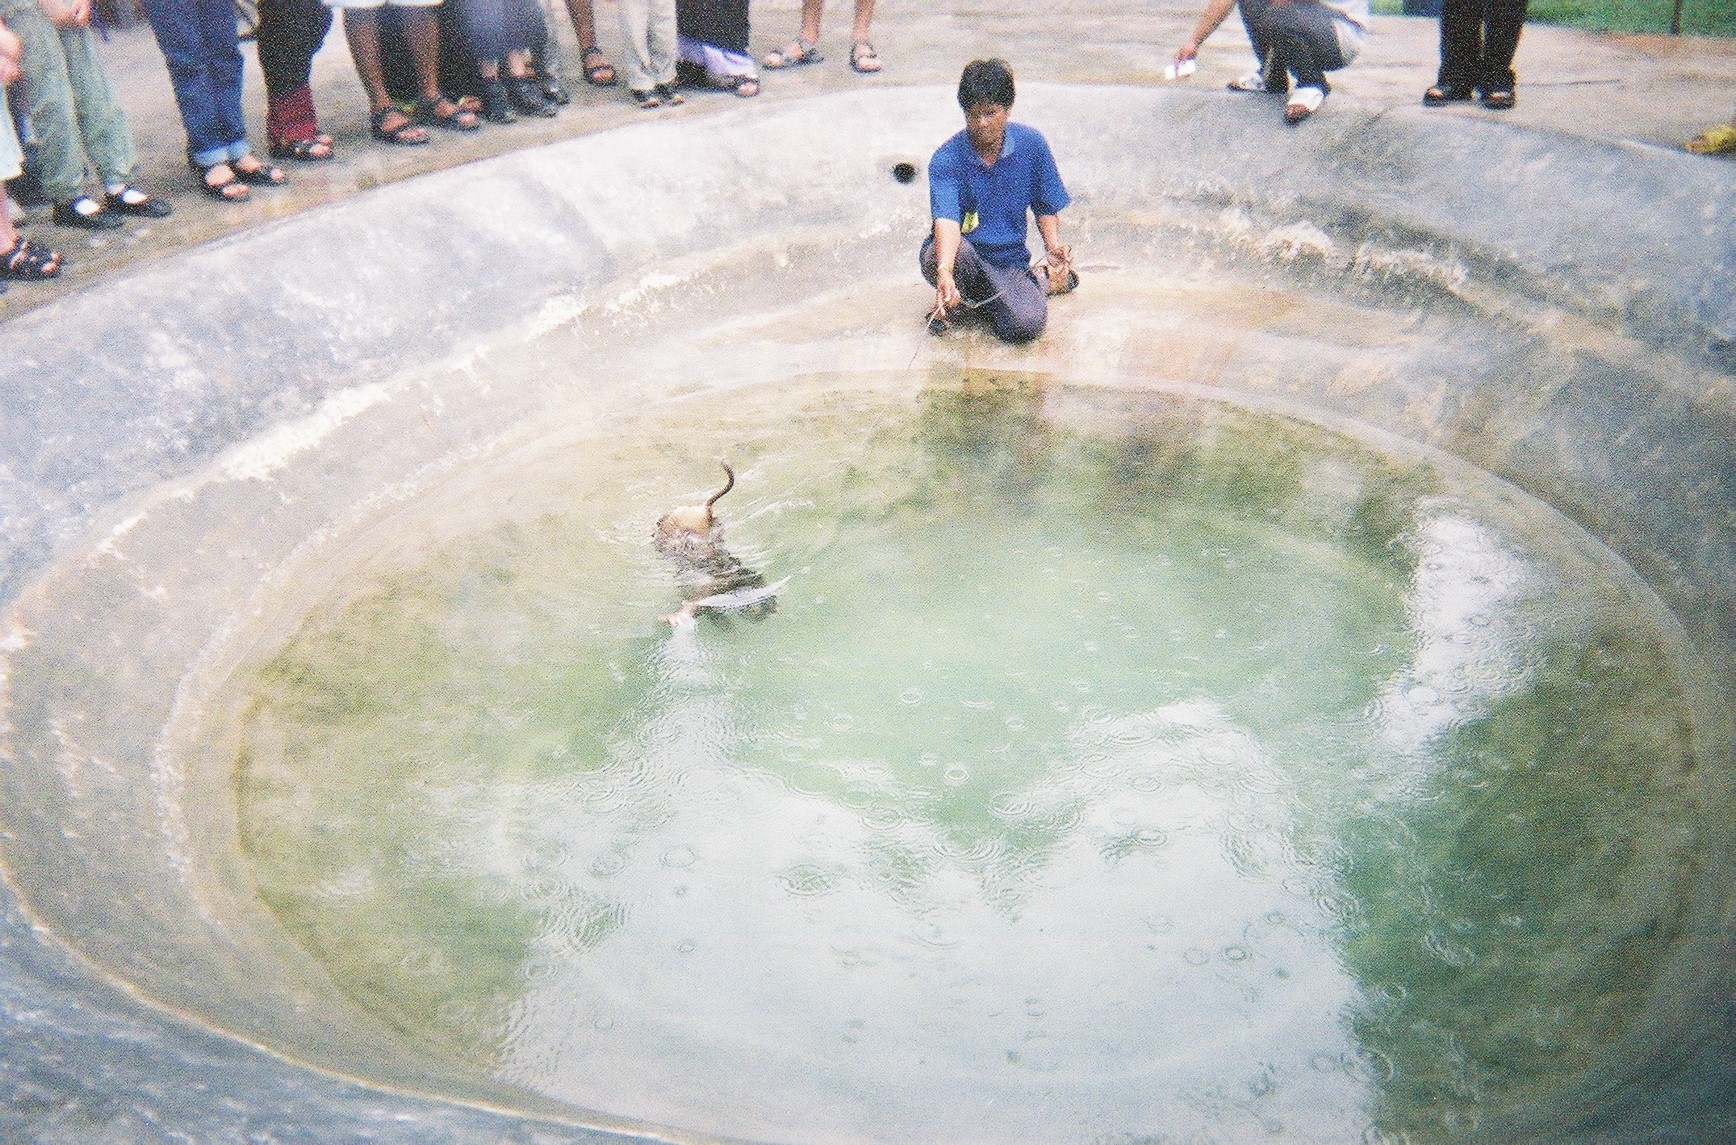 Monkey entering the water